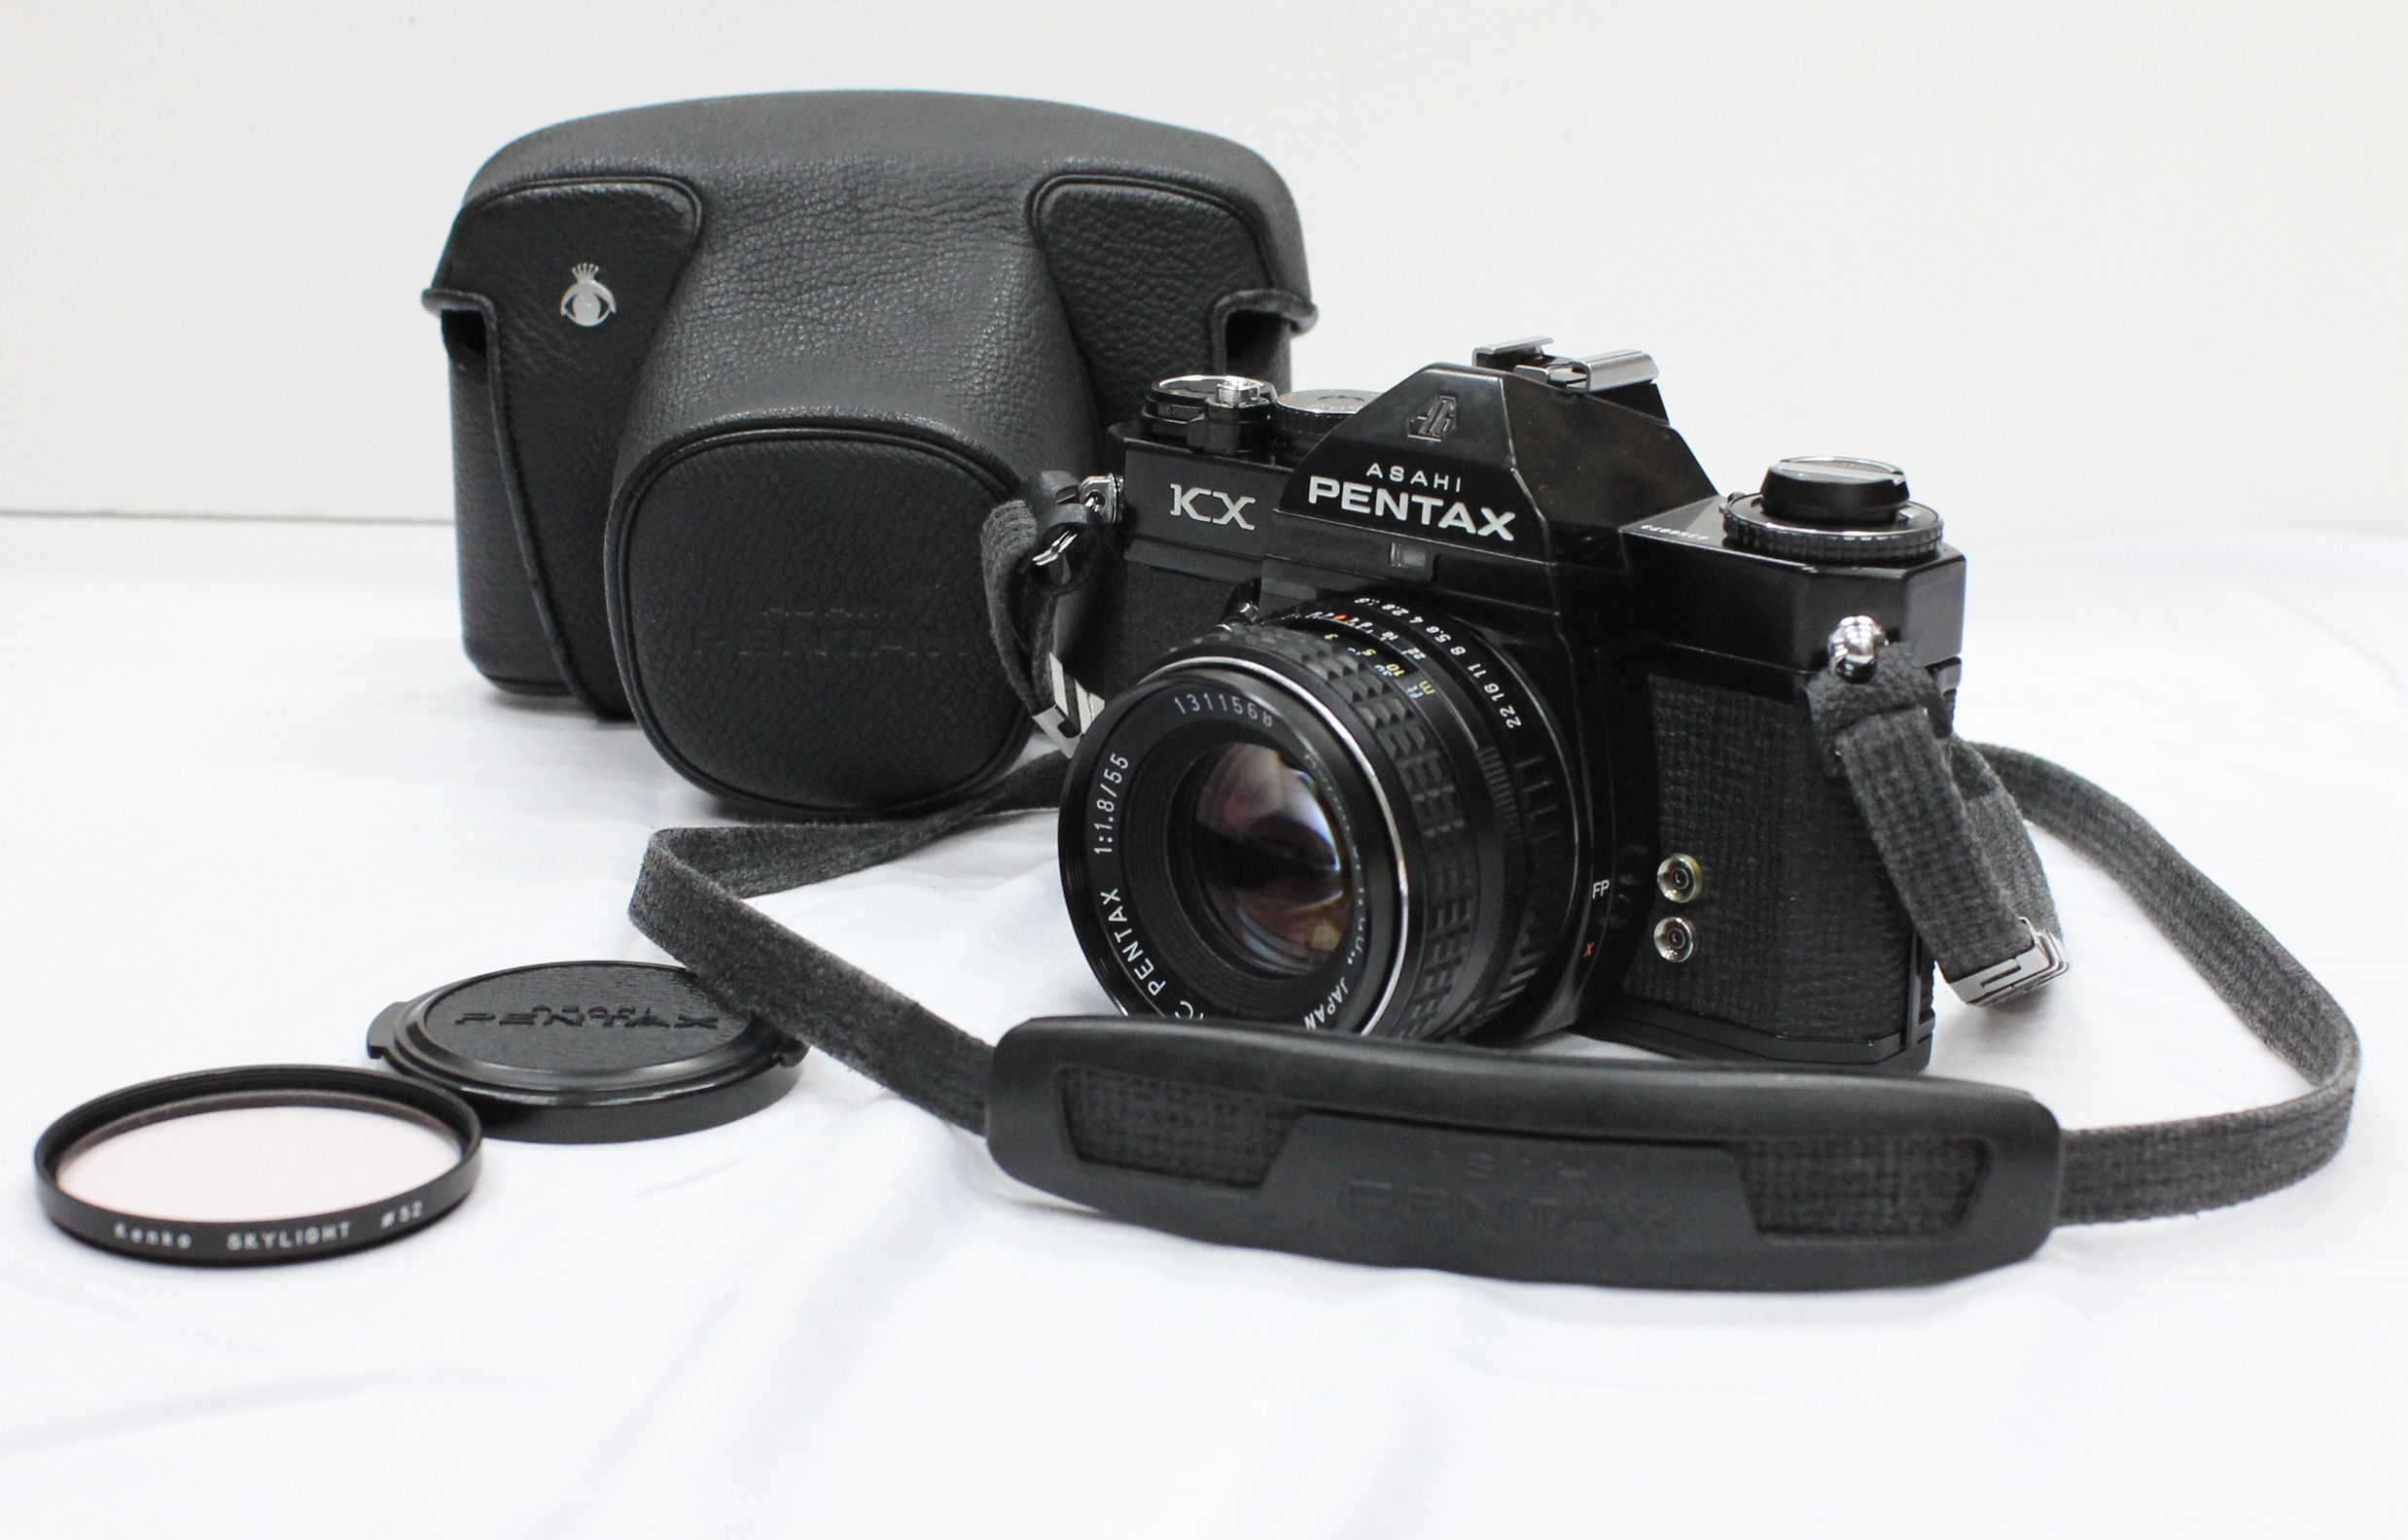 Pentax KX Body with SMC PENTAX 55mm F/1.8 Lens and Filter, Camera Case and  Strap from Japan (C1140) | Big Fish J-Camera (Big Fish J-Shop)